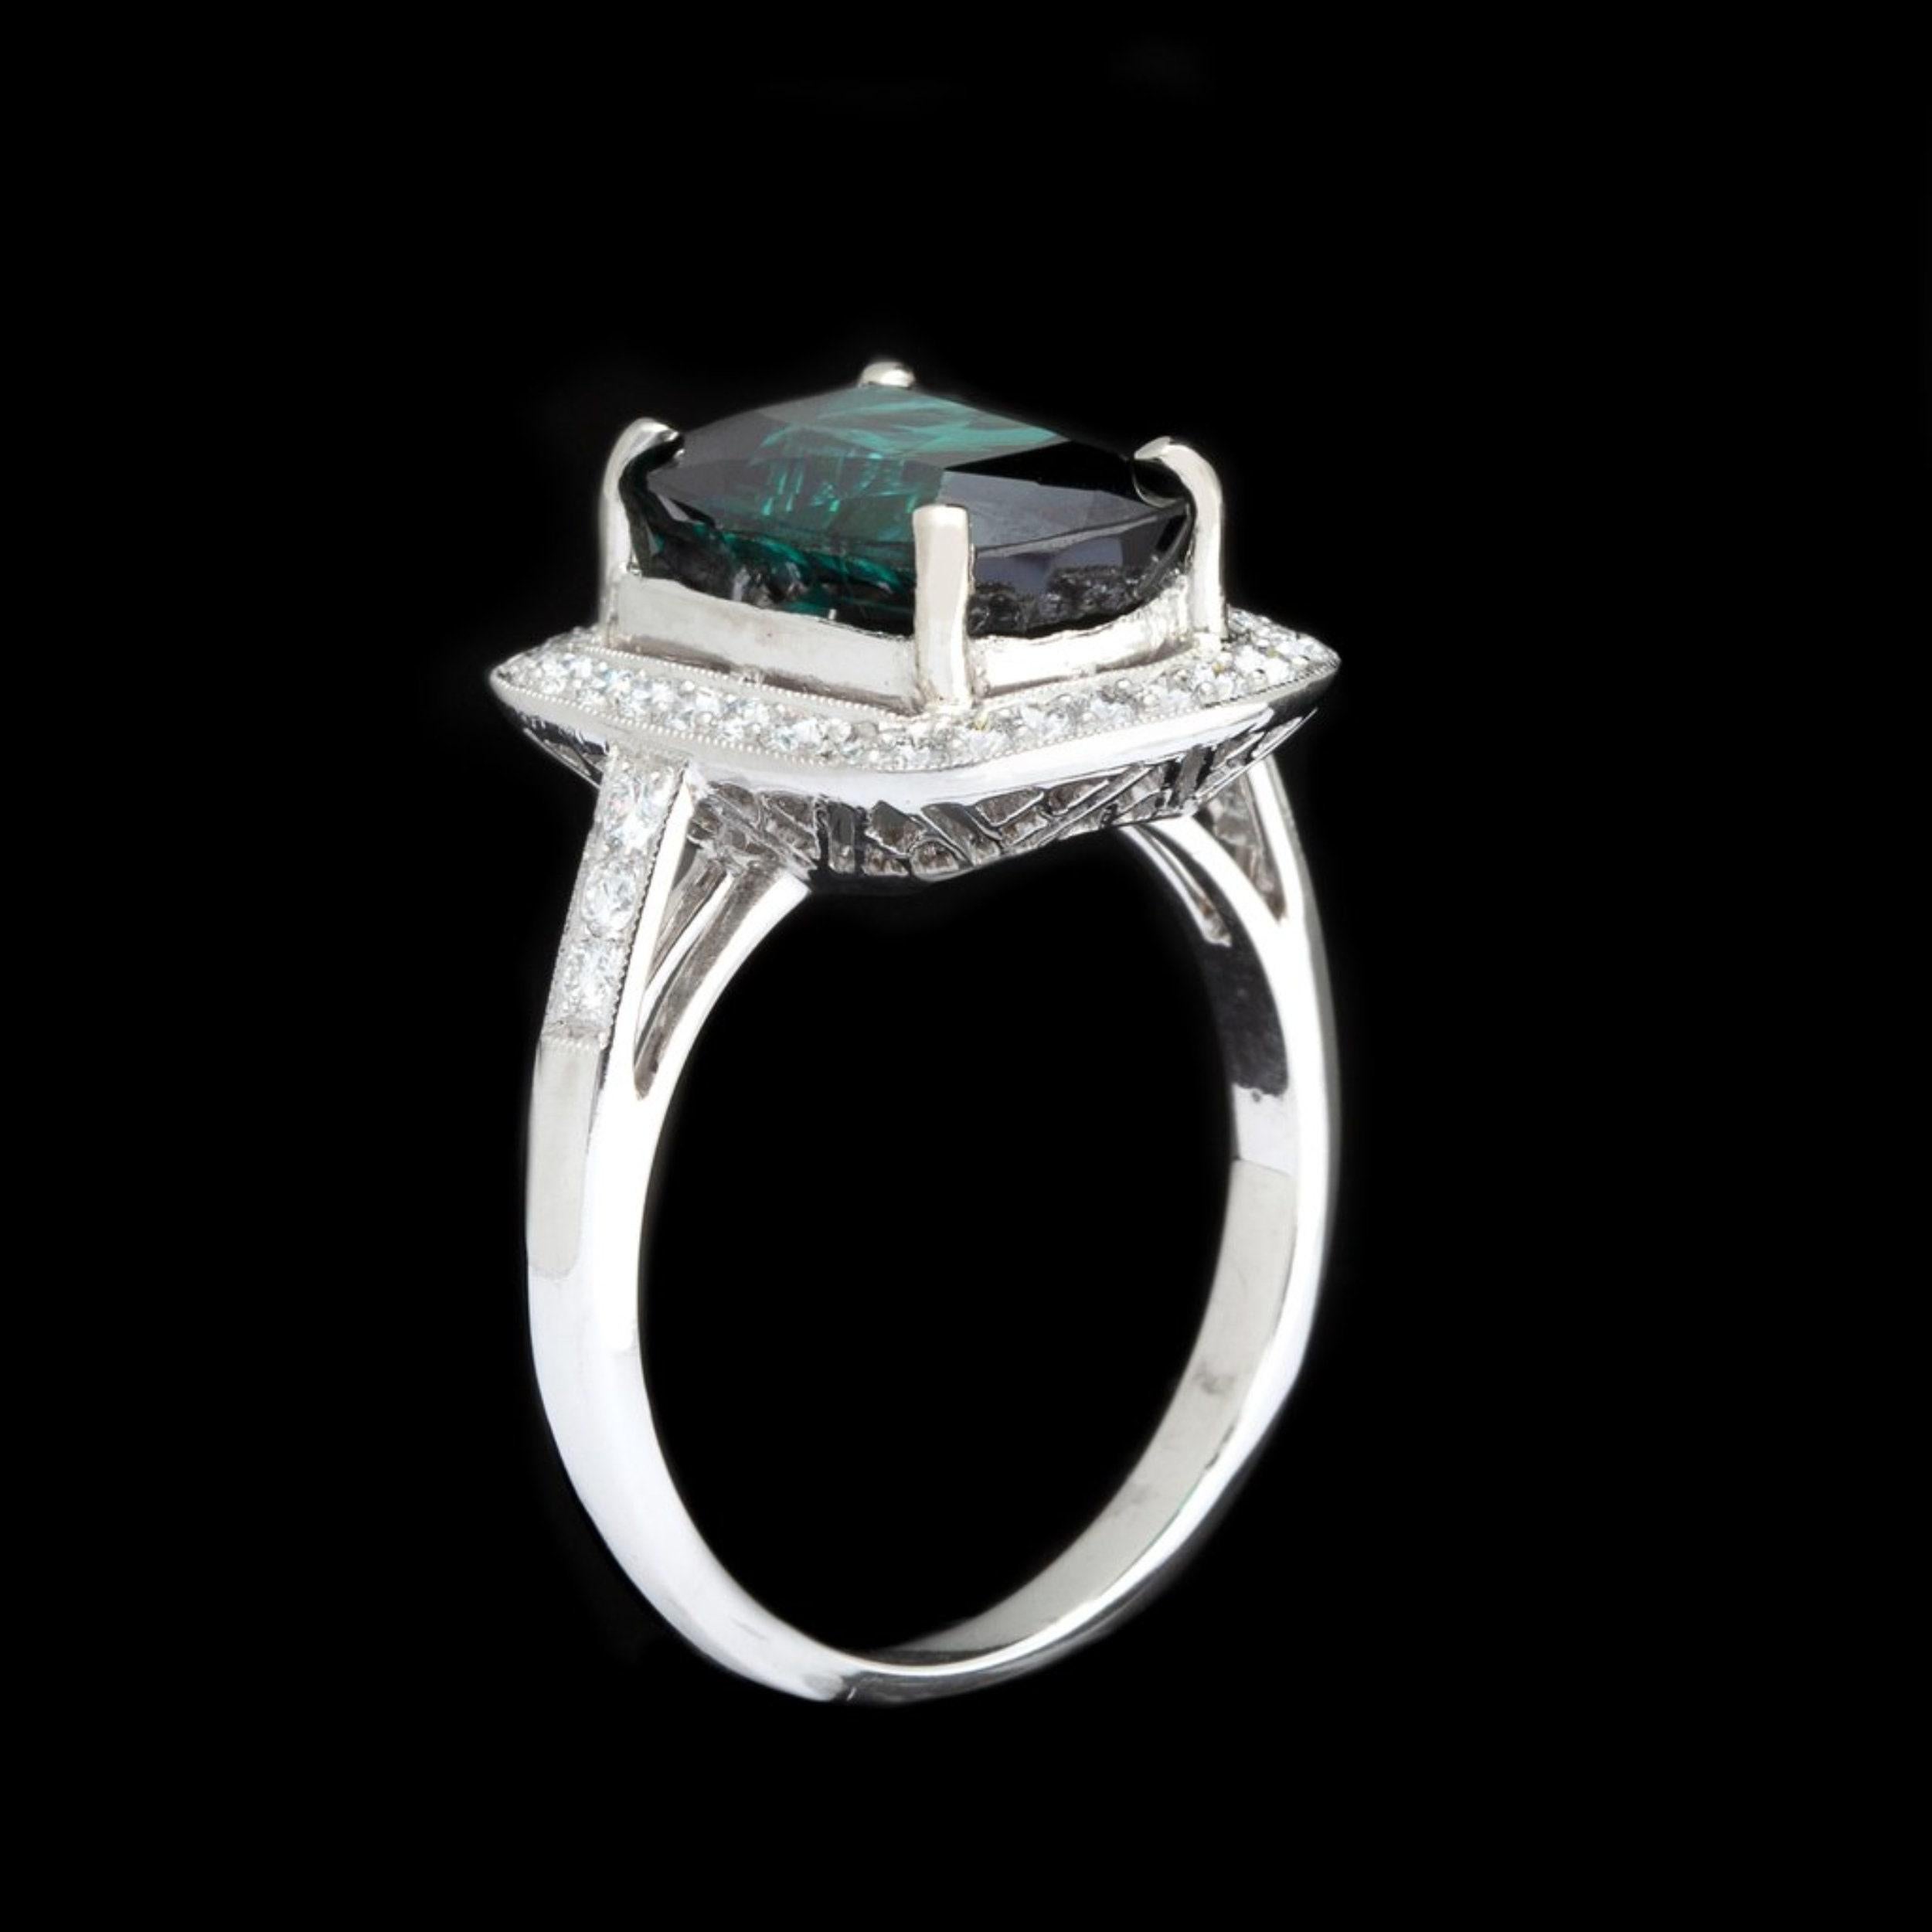 For Sale:  4 Carat Cushion Cut Emerald Engagement Ring Vintage Emerald White Gold Ring 3